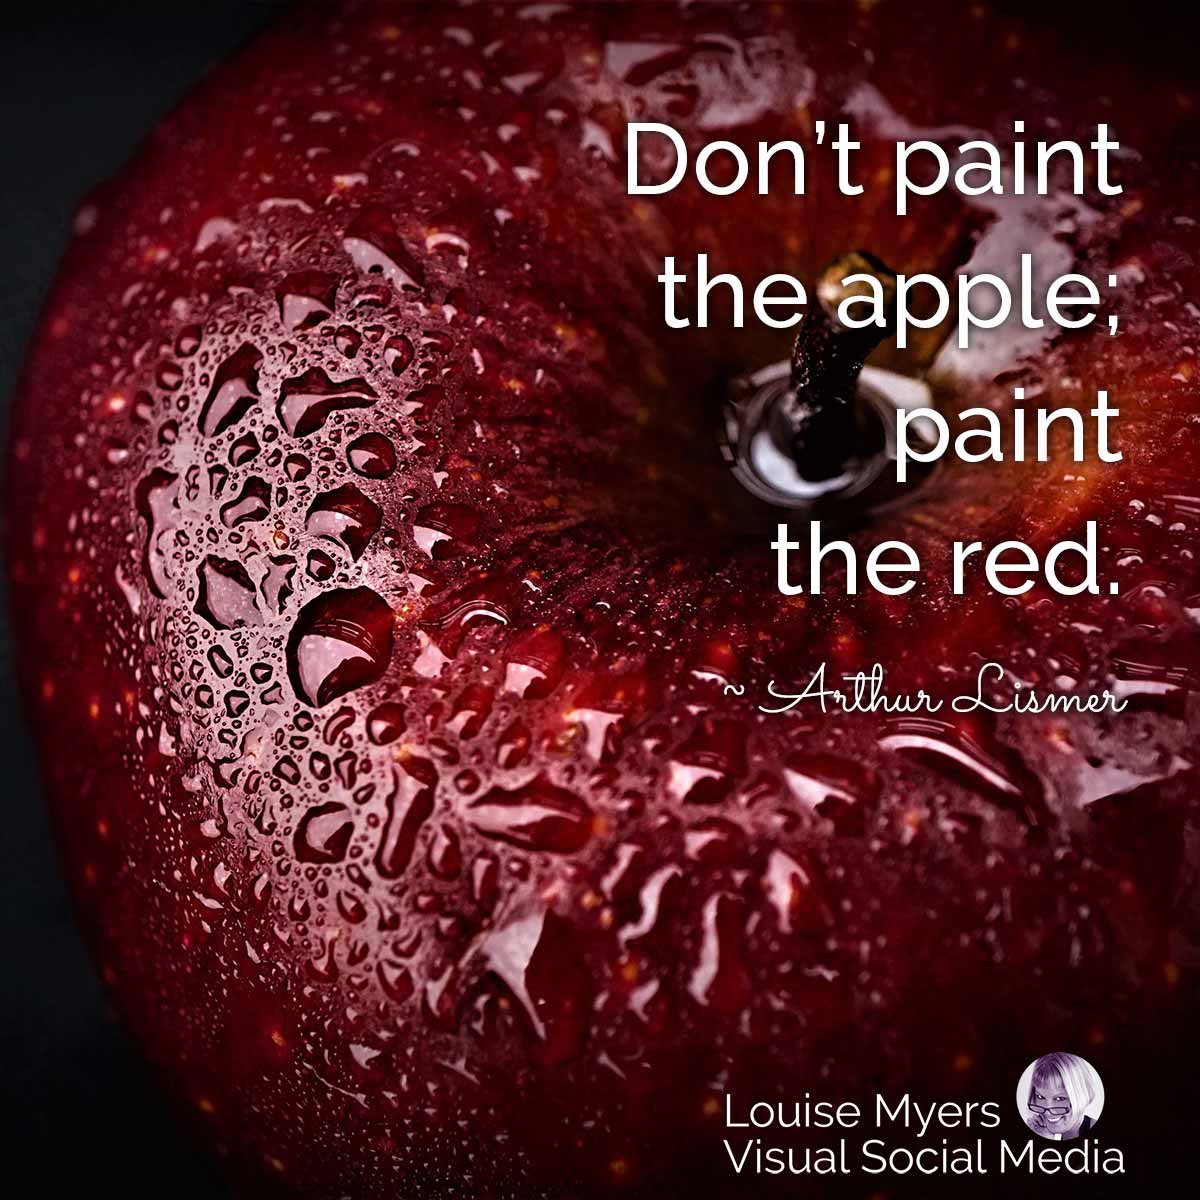 closeup of juicy red apple says don't paint the apple, paint the red.